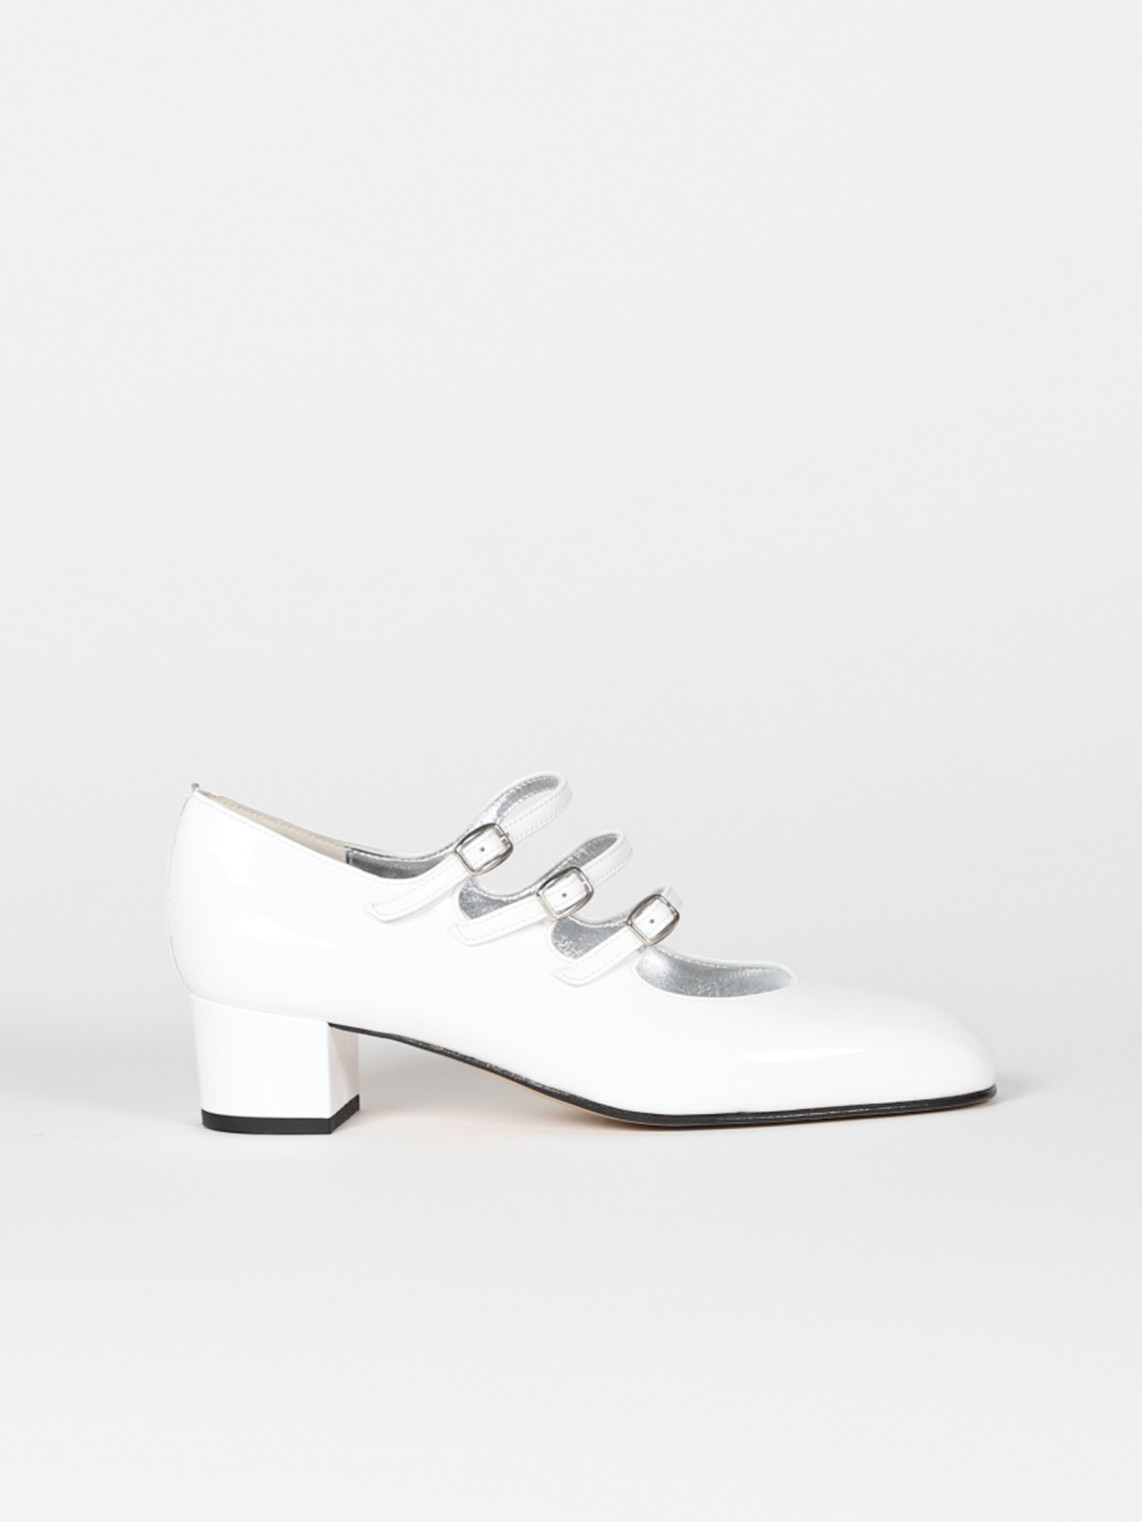 KINA white patent leather mary janes | Carel Paris Shoes